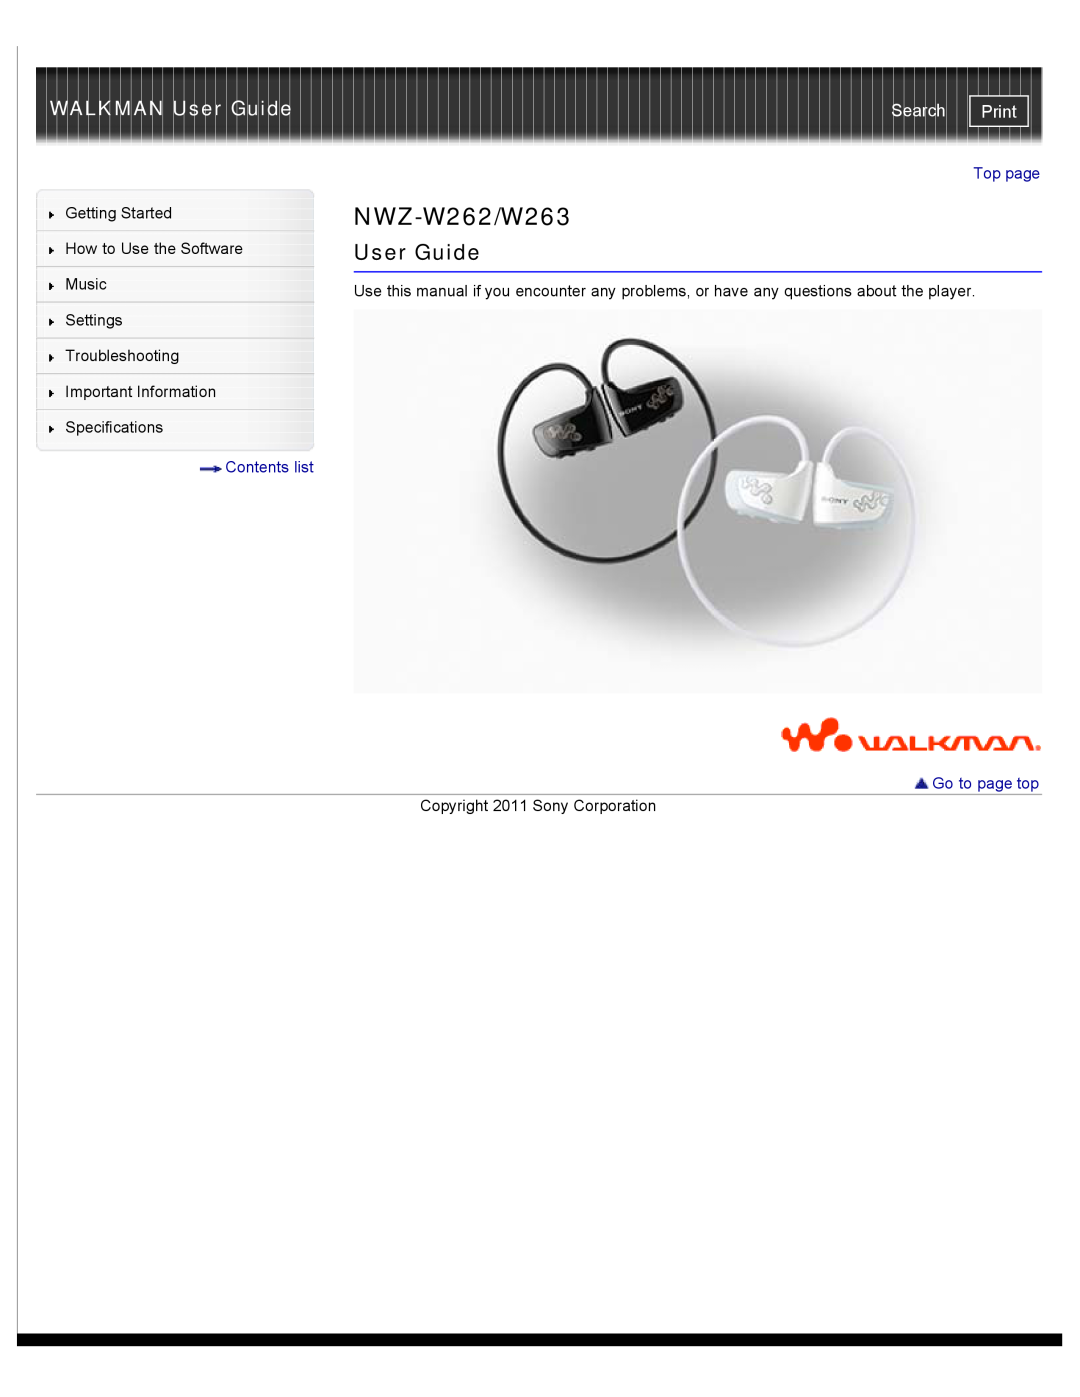 Sony NWZ-W263 specifications WALKMAN User Guide, Search, Print, NWZ-W262/W263, Contents list, Top page, Go to page top 